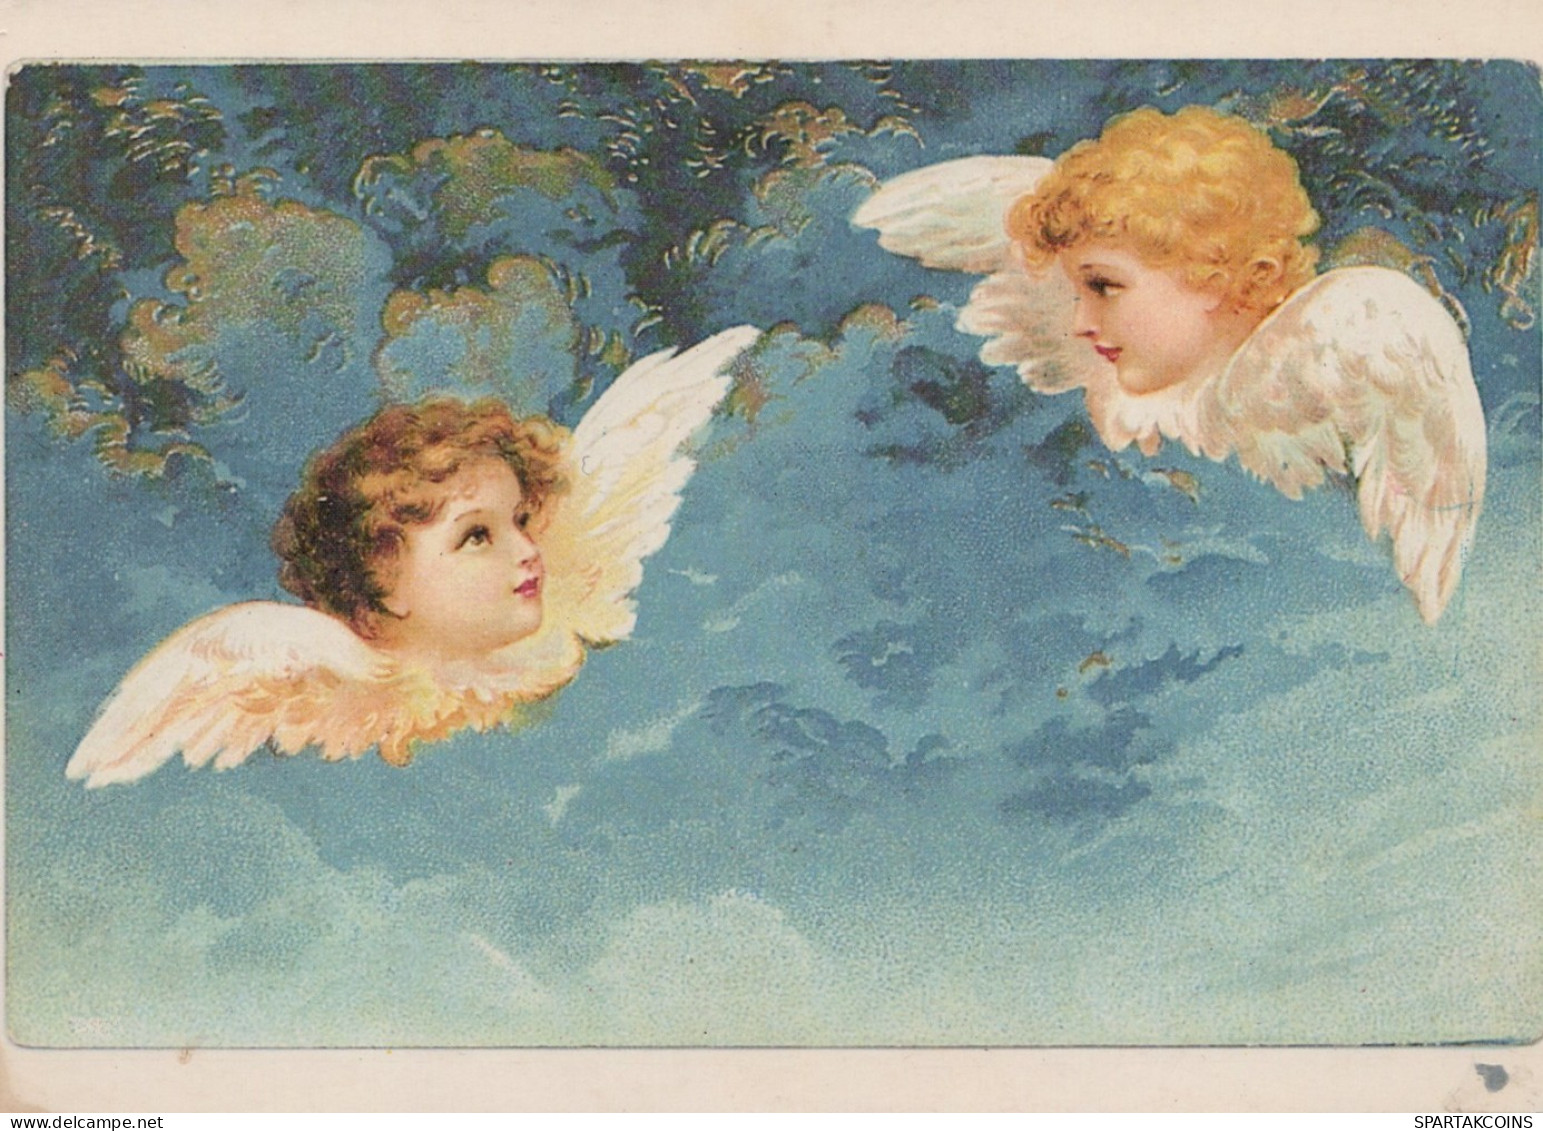 ANGELO Buon Anno Natale Vintage Cartolina CPSM #PAH281.IT - Anges